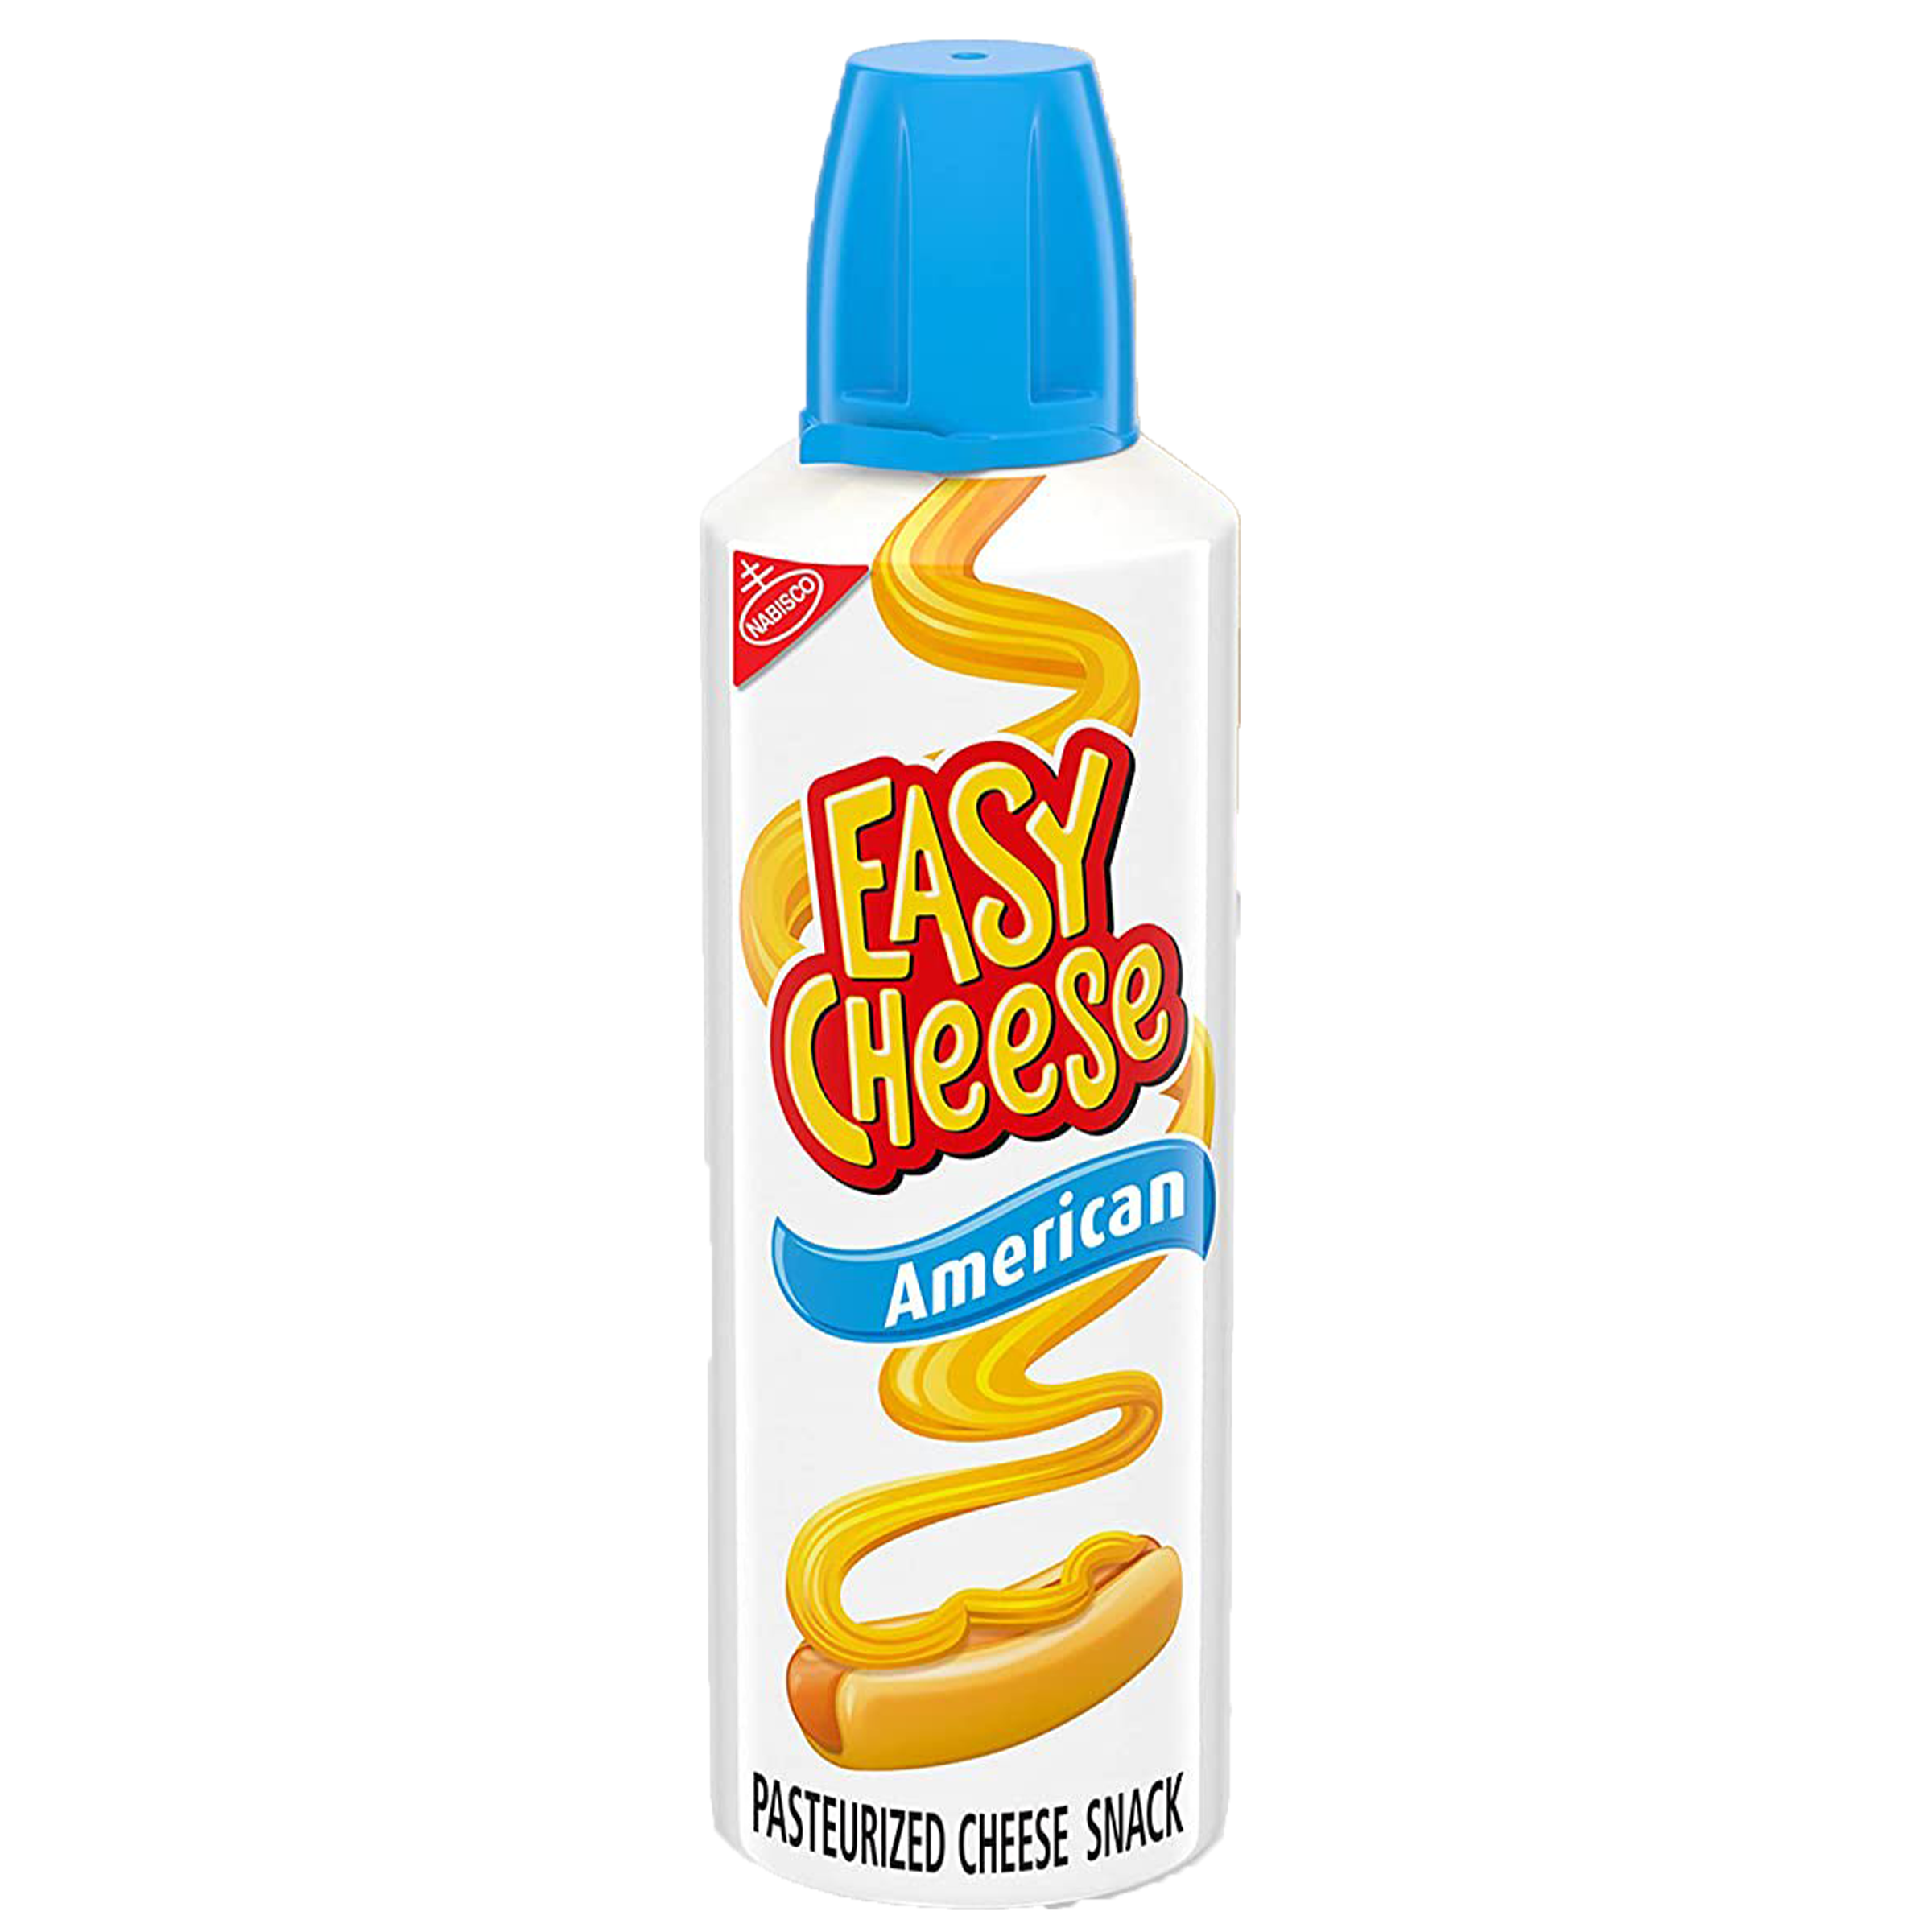 Easy Cheese - American